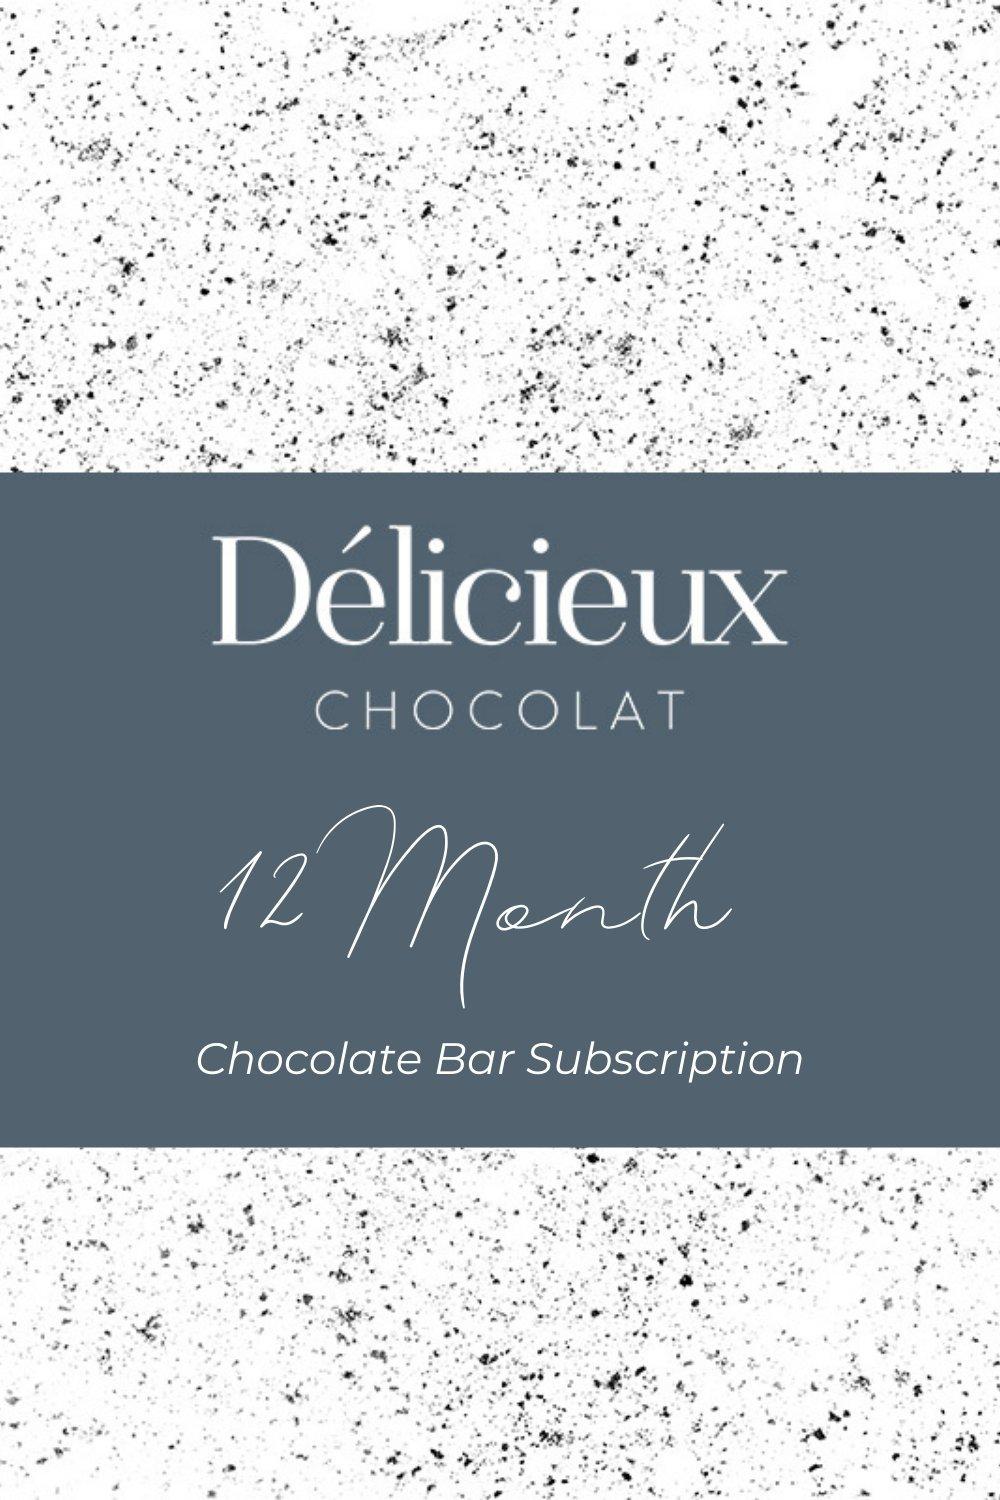 12 Month Chocolate Bar Subscription